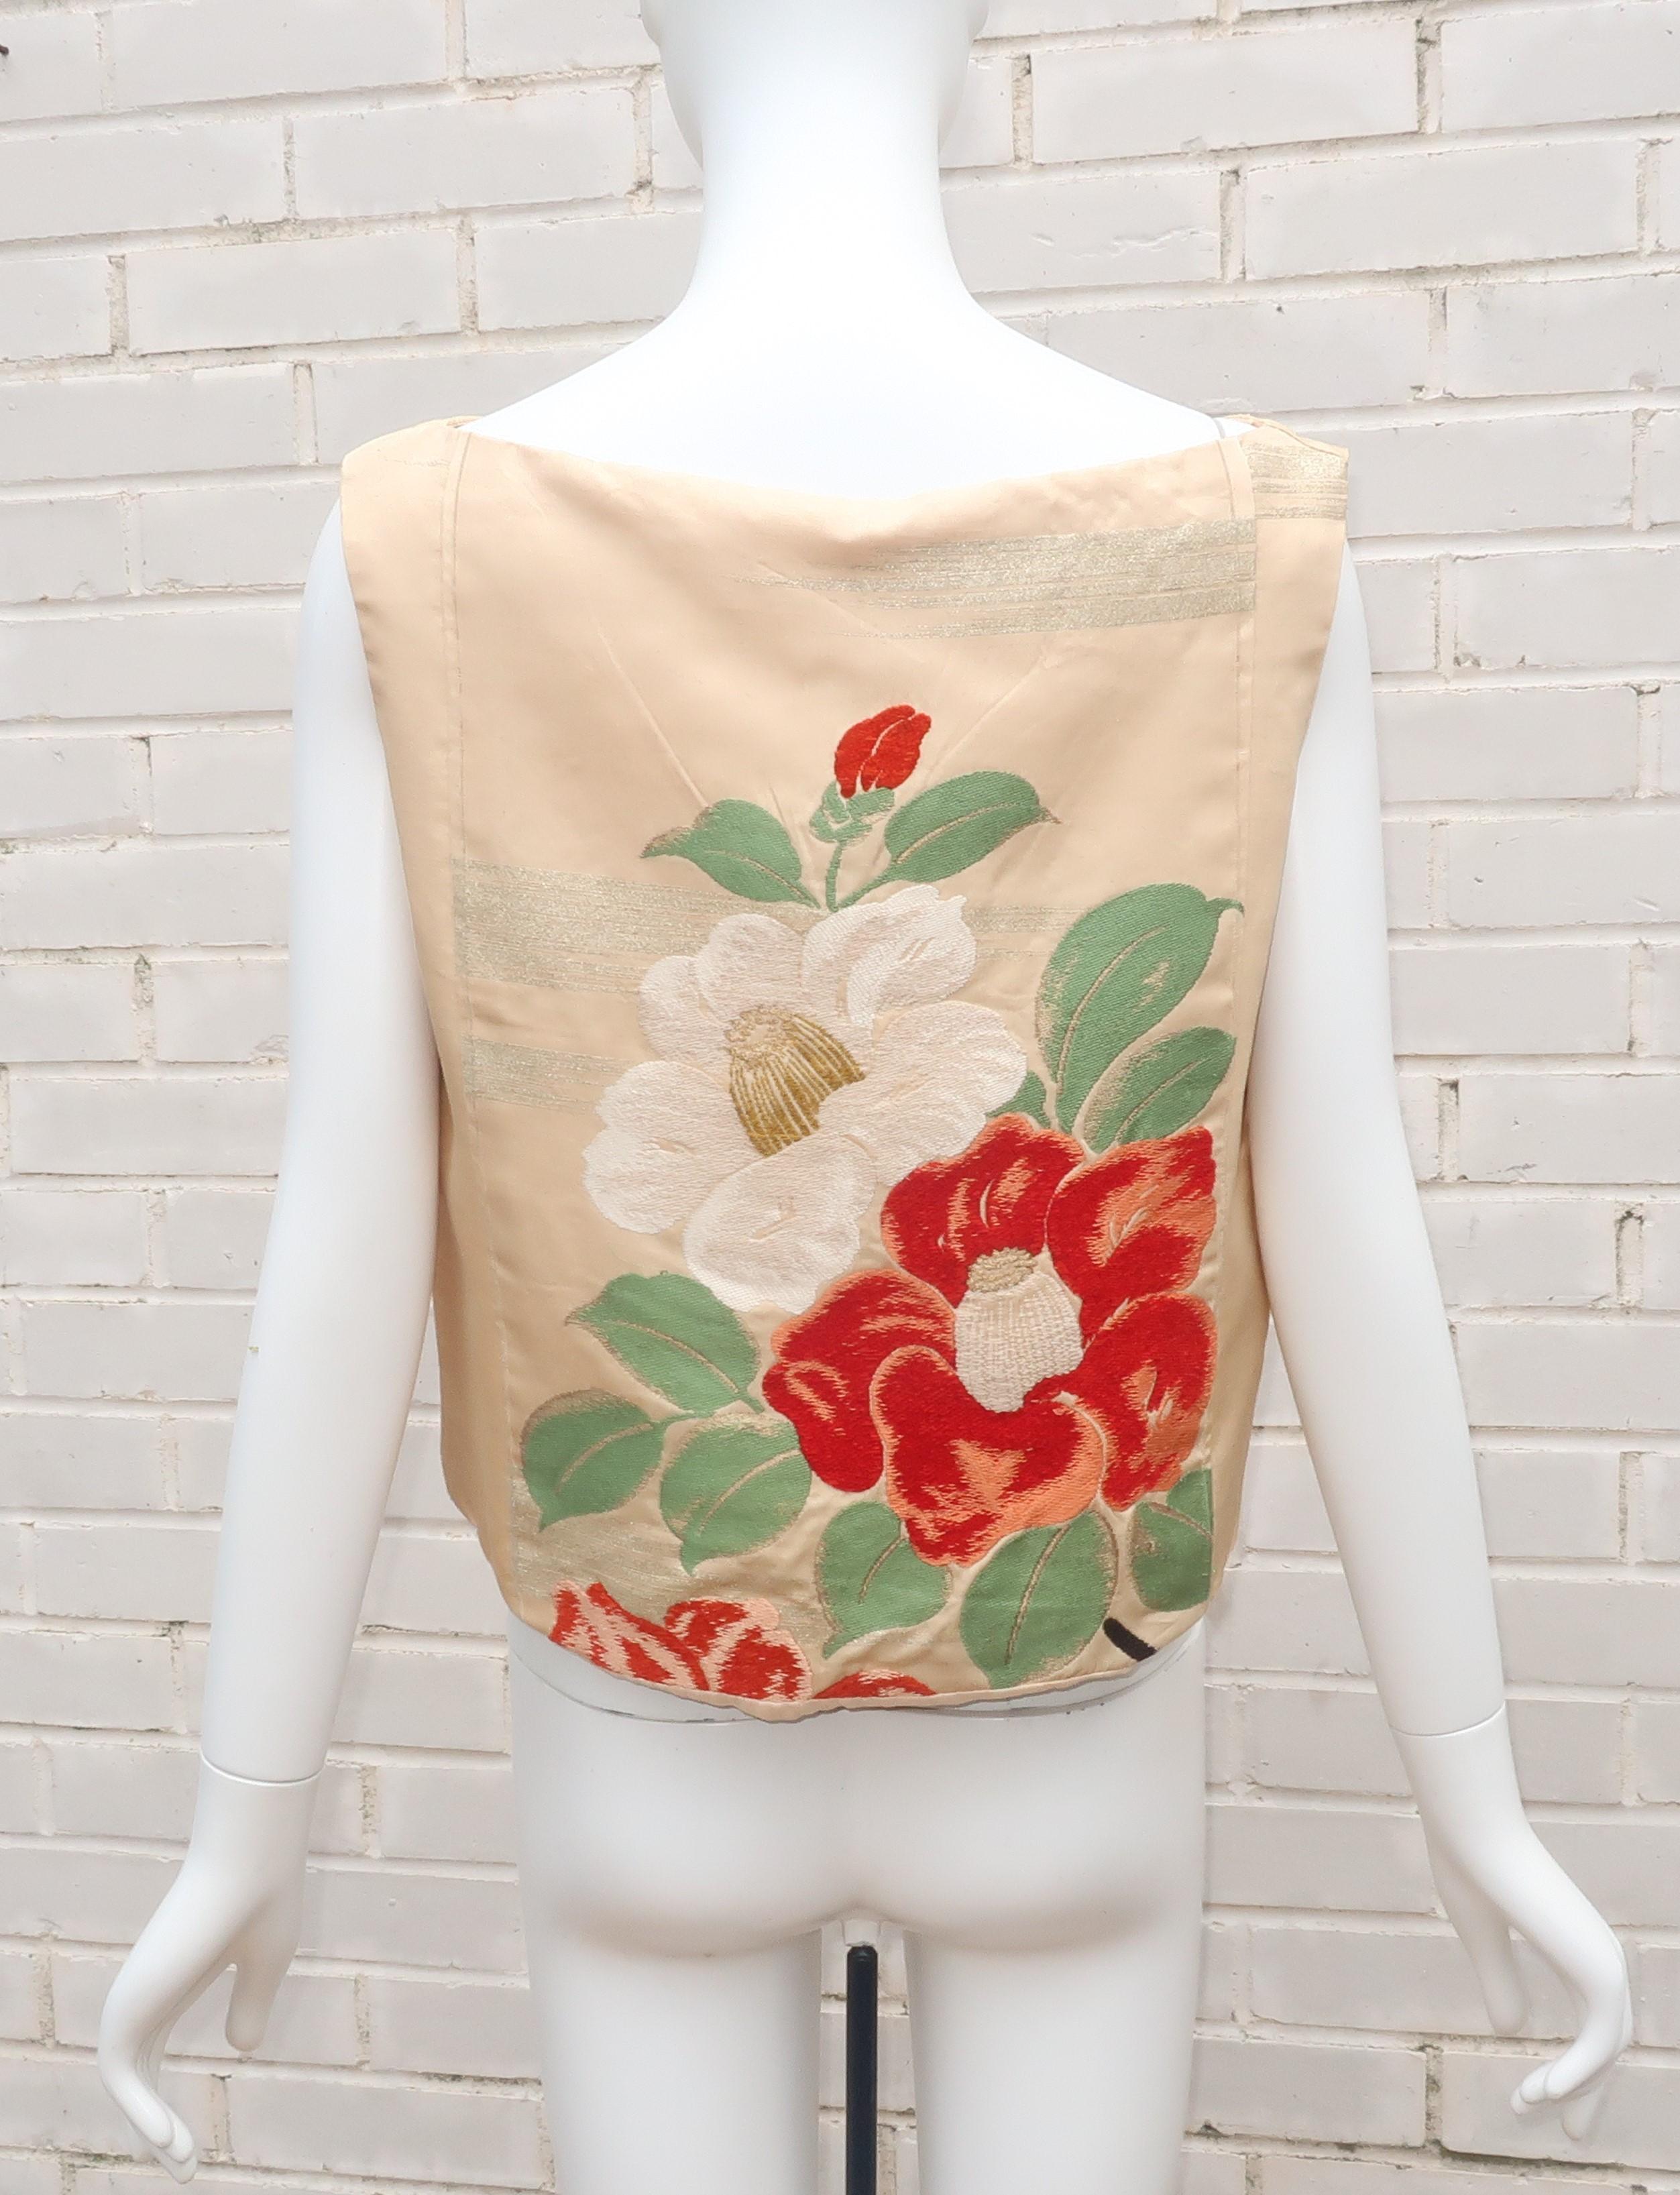 Women's Custom Obi Creme Top With Floral Design, C.1950 For Sale